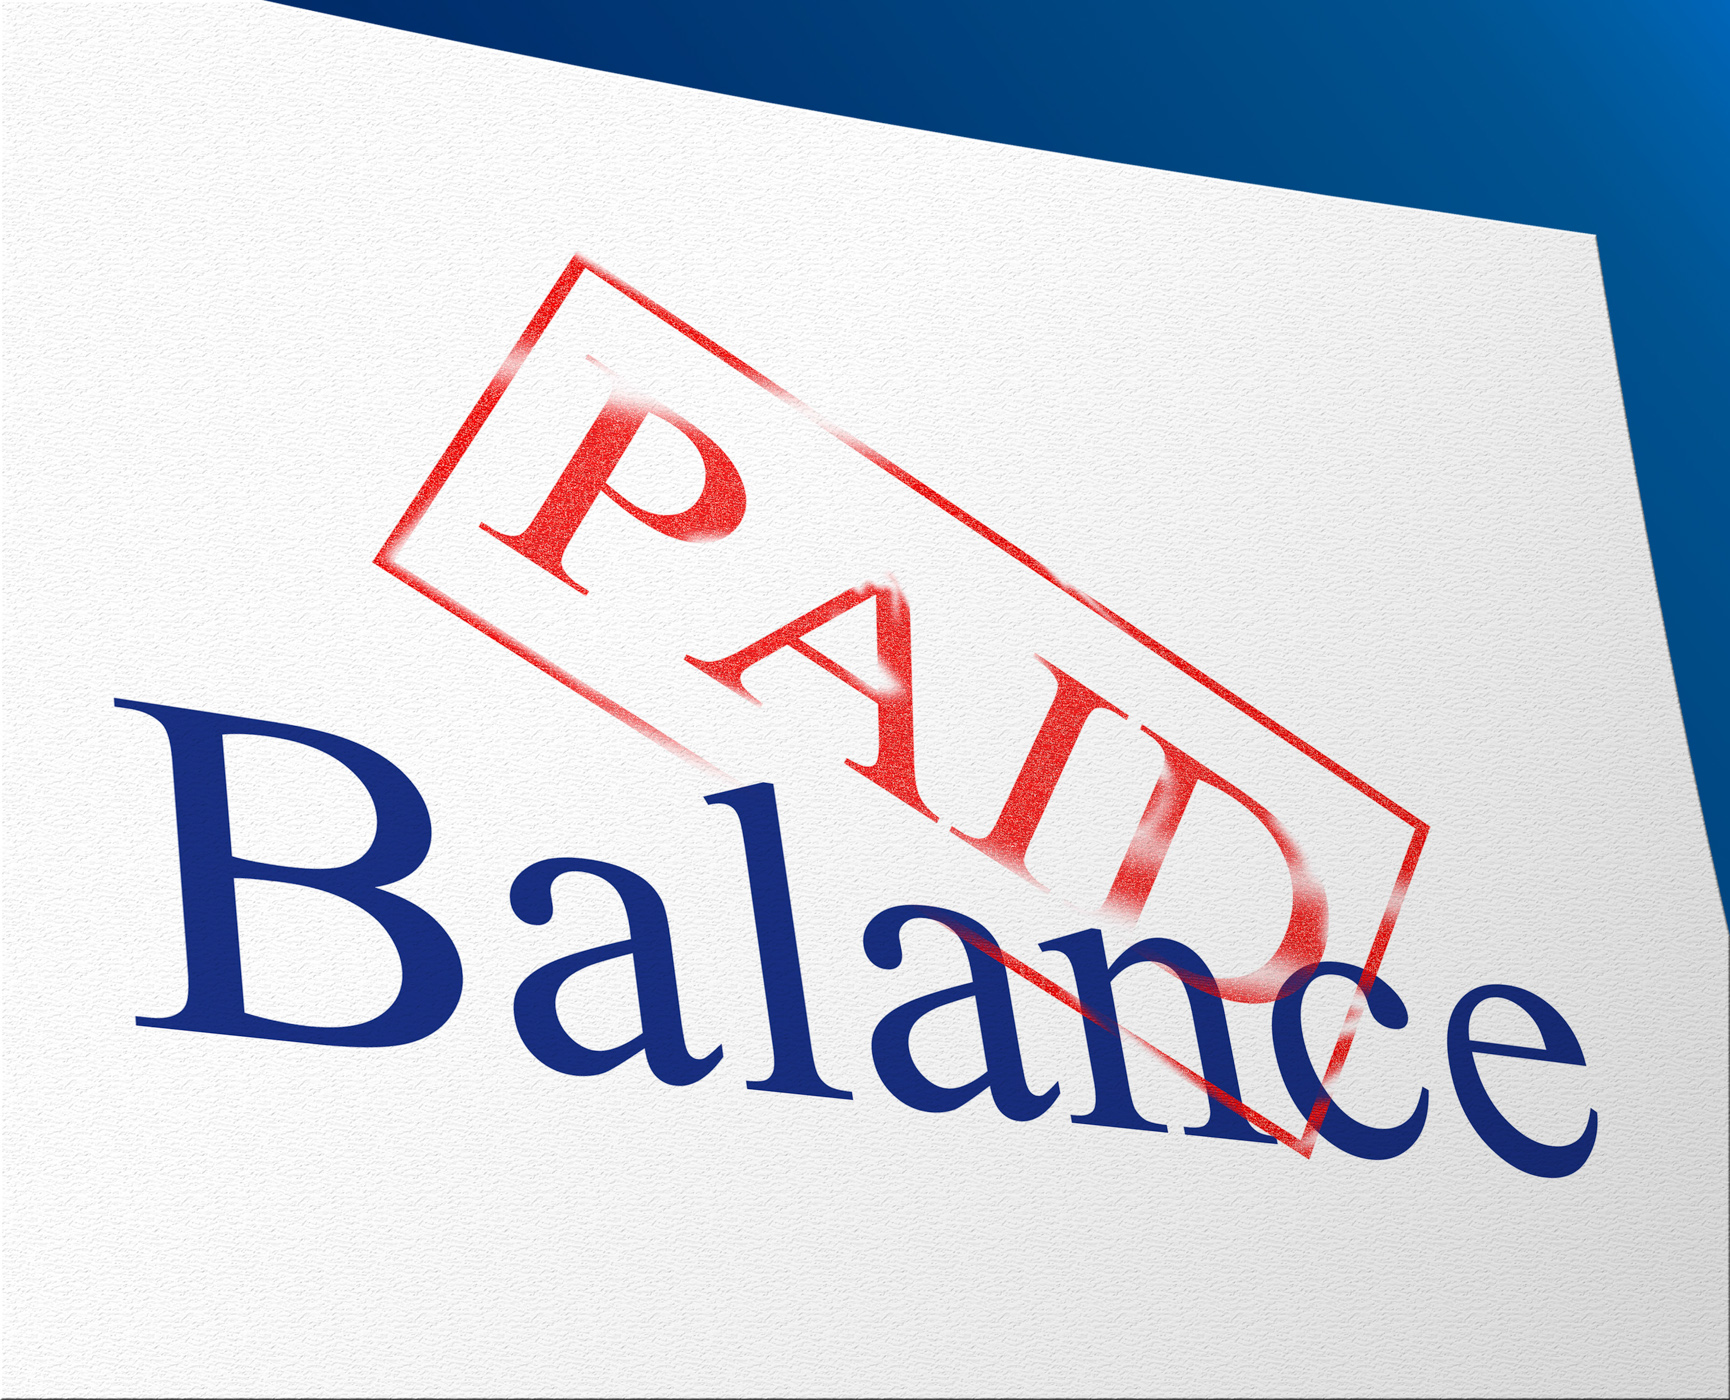 Balance paid indicates confirmation bills and equality photo